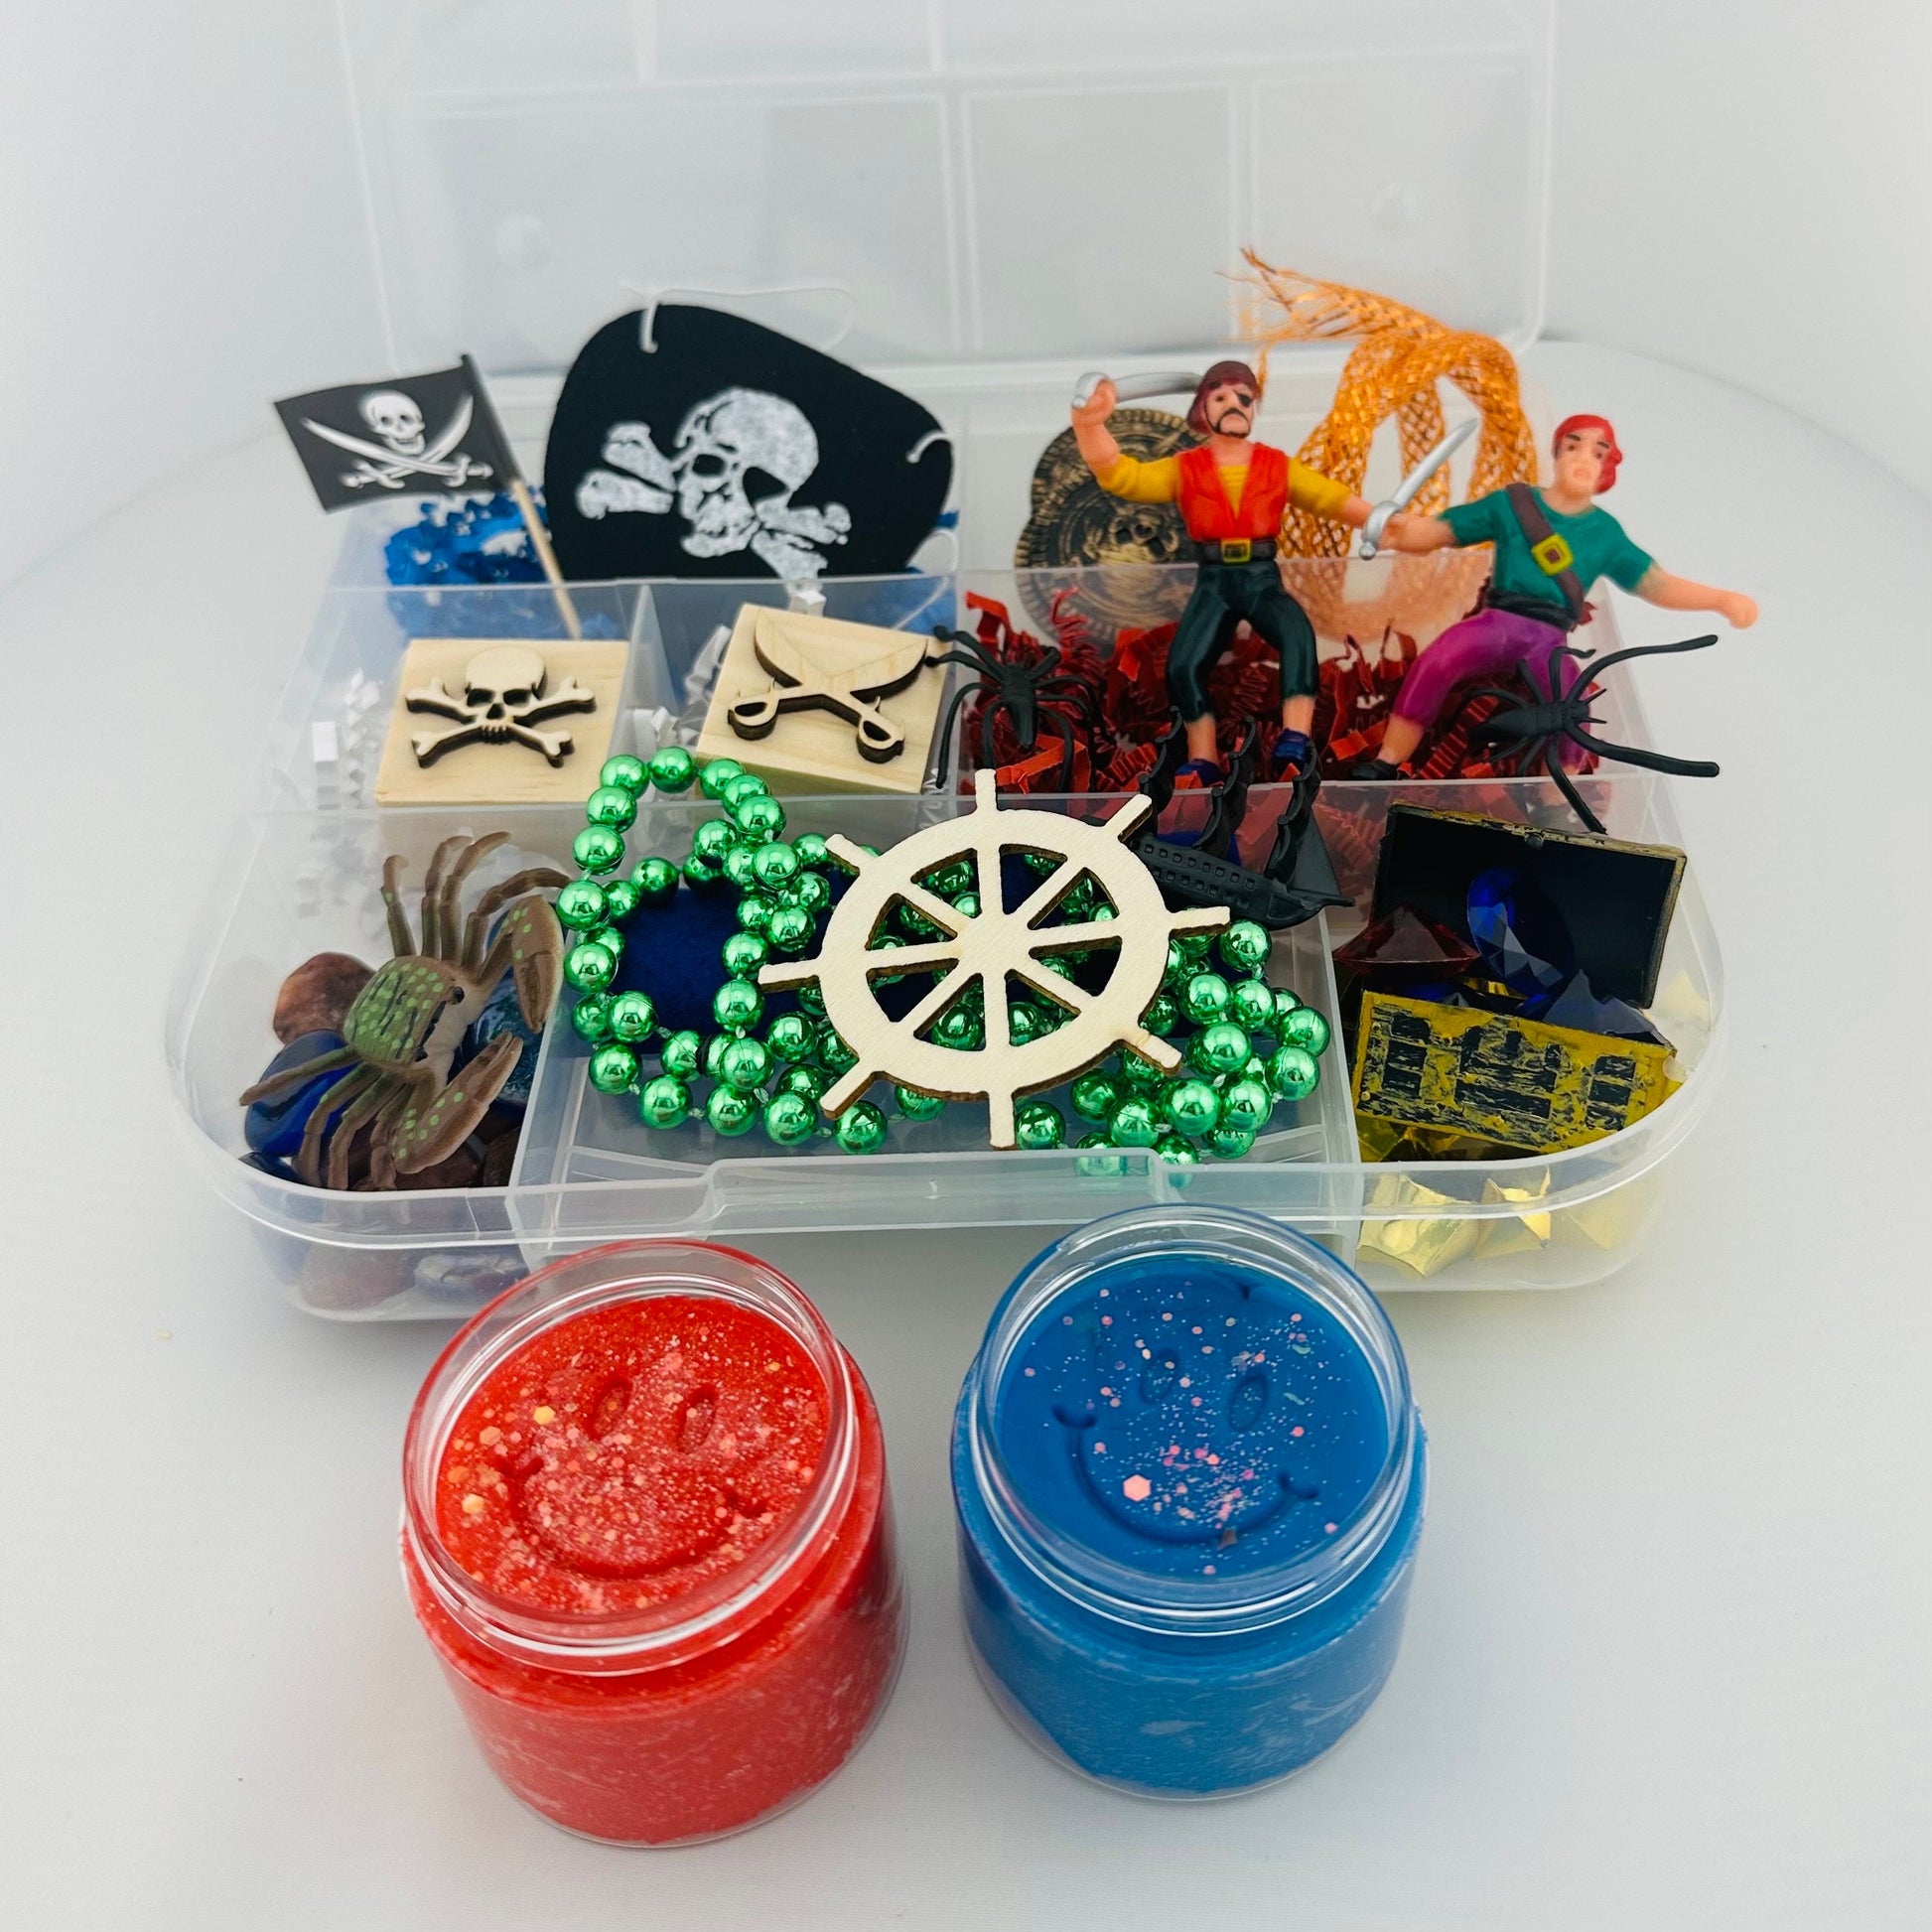 Pirate Play Dough Sensory Kit, Pirate Busy Box, Pirate Activity Bin for Children, Birthday Gifts For Boys, Kinetic Sand Kits, Play Dough Kit